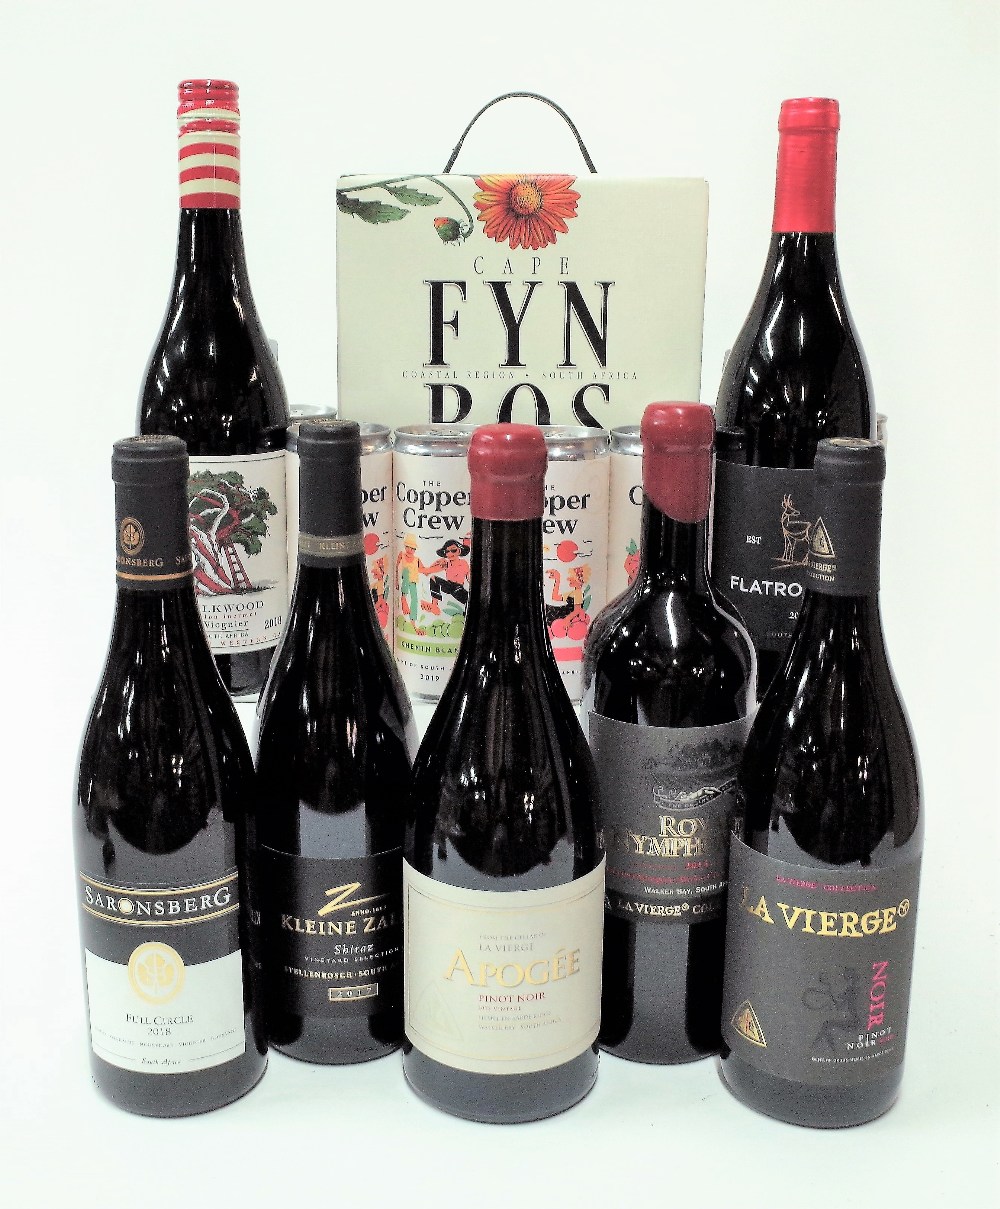 7 BOTTLES, 1 3l BOX, 8 CANS SOUTH AFRICAN WINE WINE - Image 2 of 2